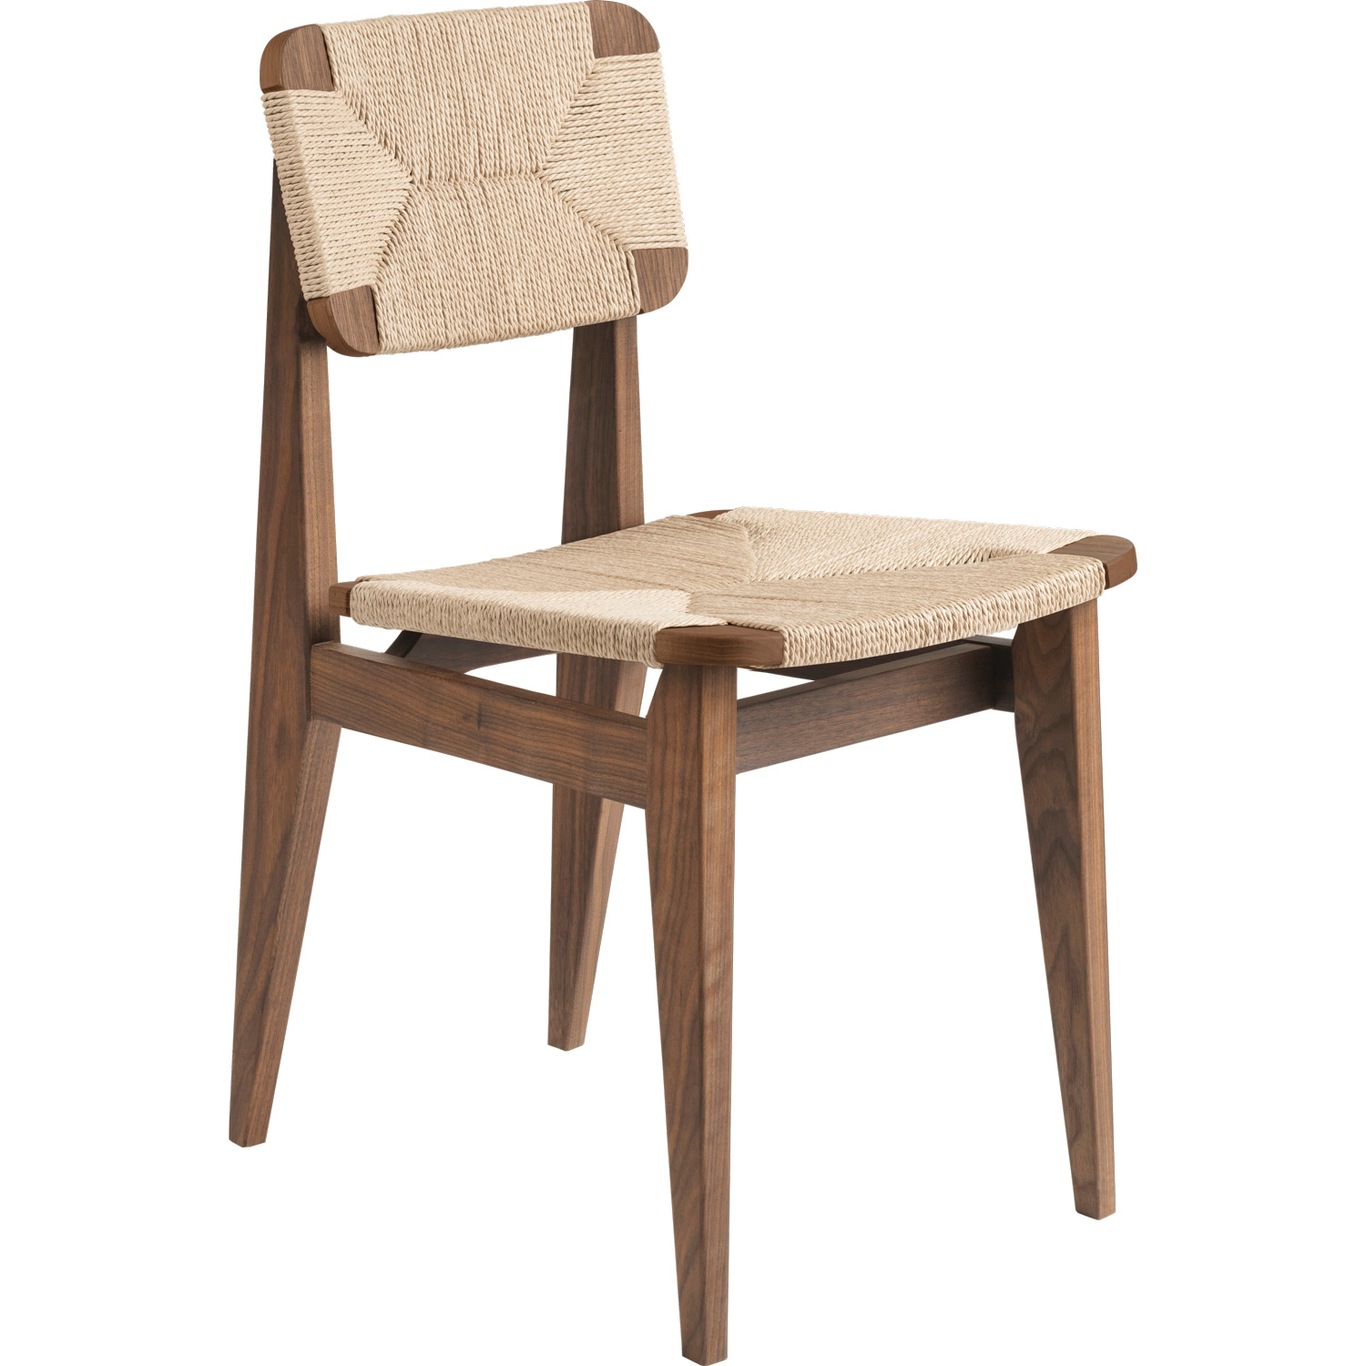 C-Chair Chair, Paper Cord / Oiled Walnut